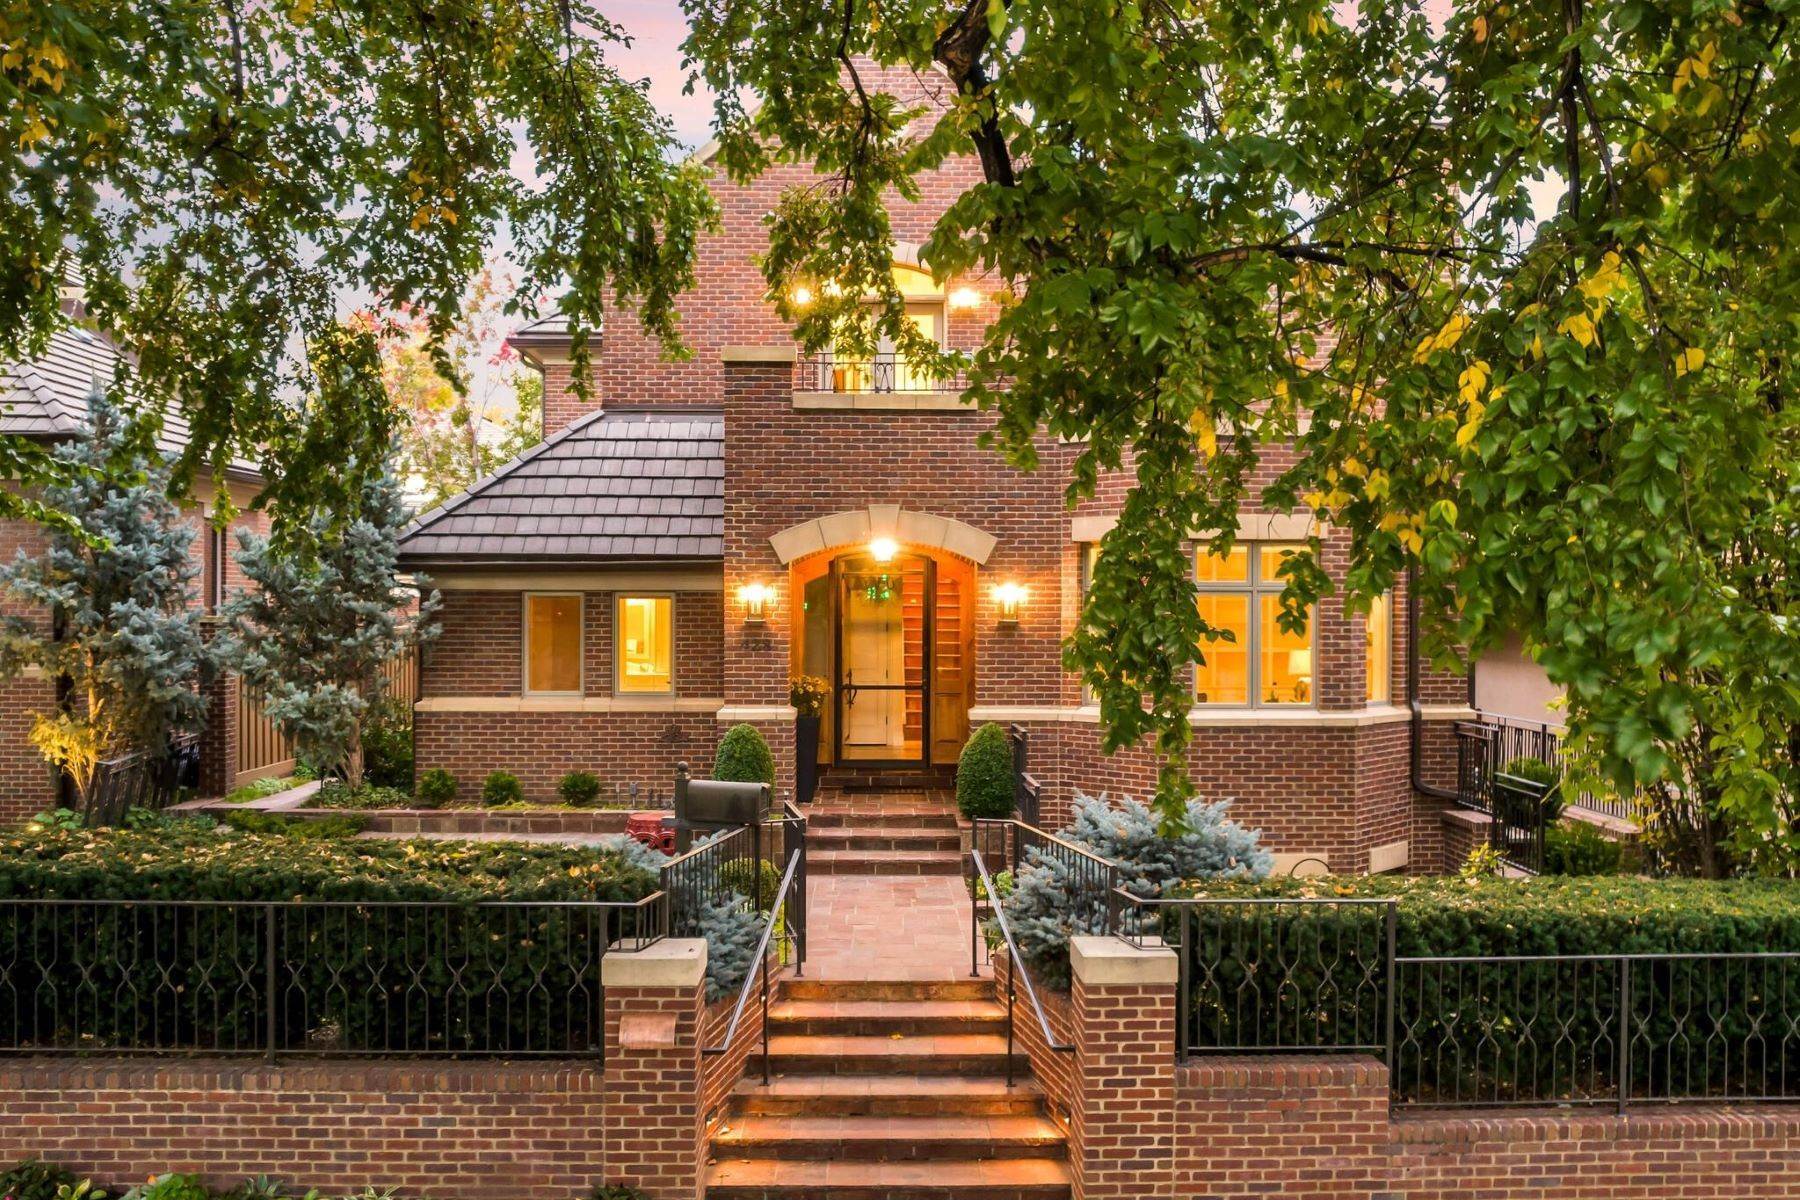 Single Family Homes for Active at 428 Saint Paul Street, Denver, CO, 80206 428 Saint Paul Street Denver, Colorado 80206 United States